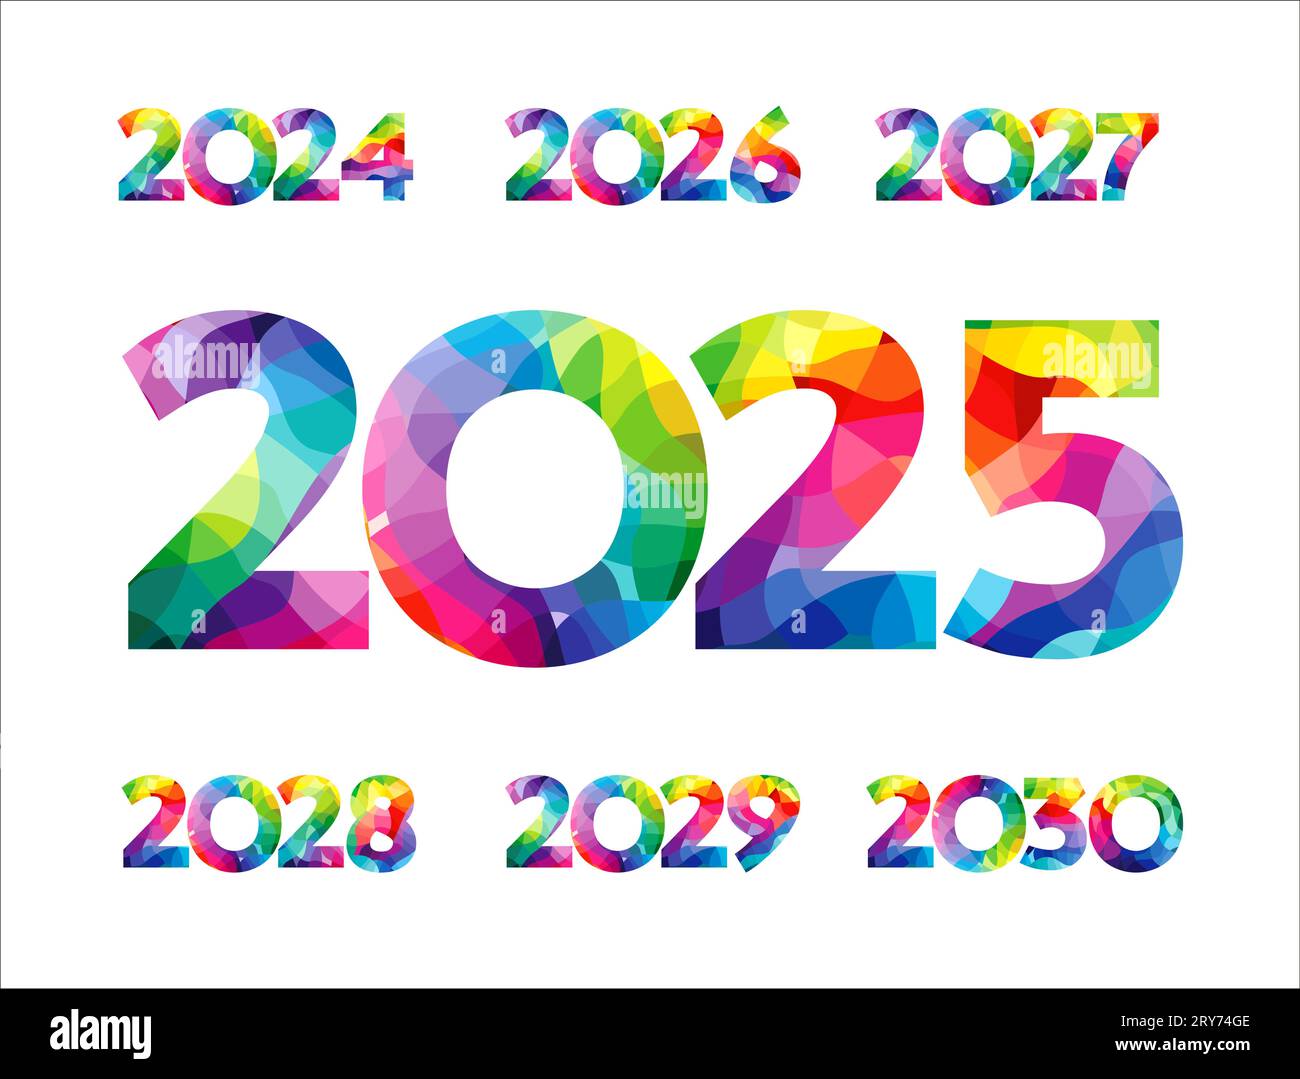 Set of colorful numbers from 2024 to 2030. Creative icons 2025, 2026, 2027, 2028 and 2029. Calendar or planner title. Business concept. Isolated stain Stock Vector